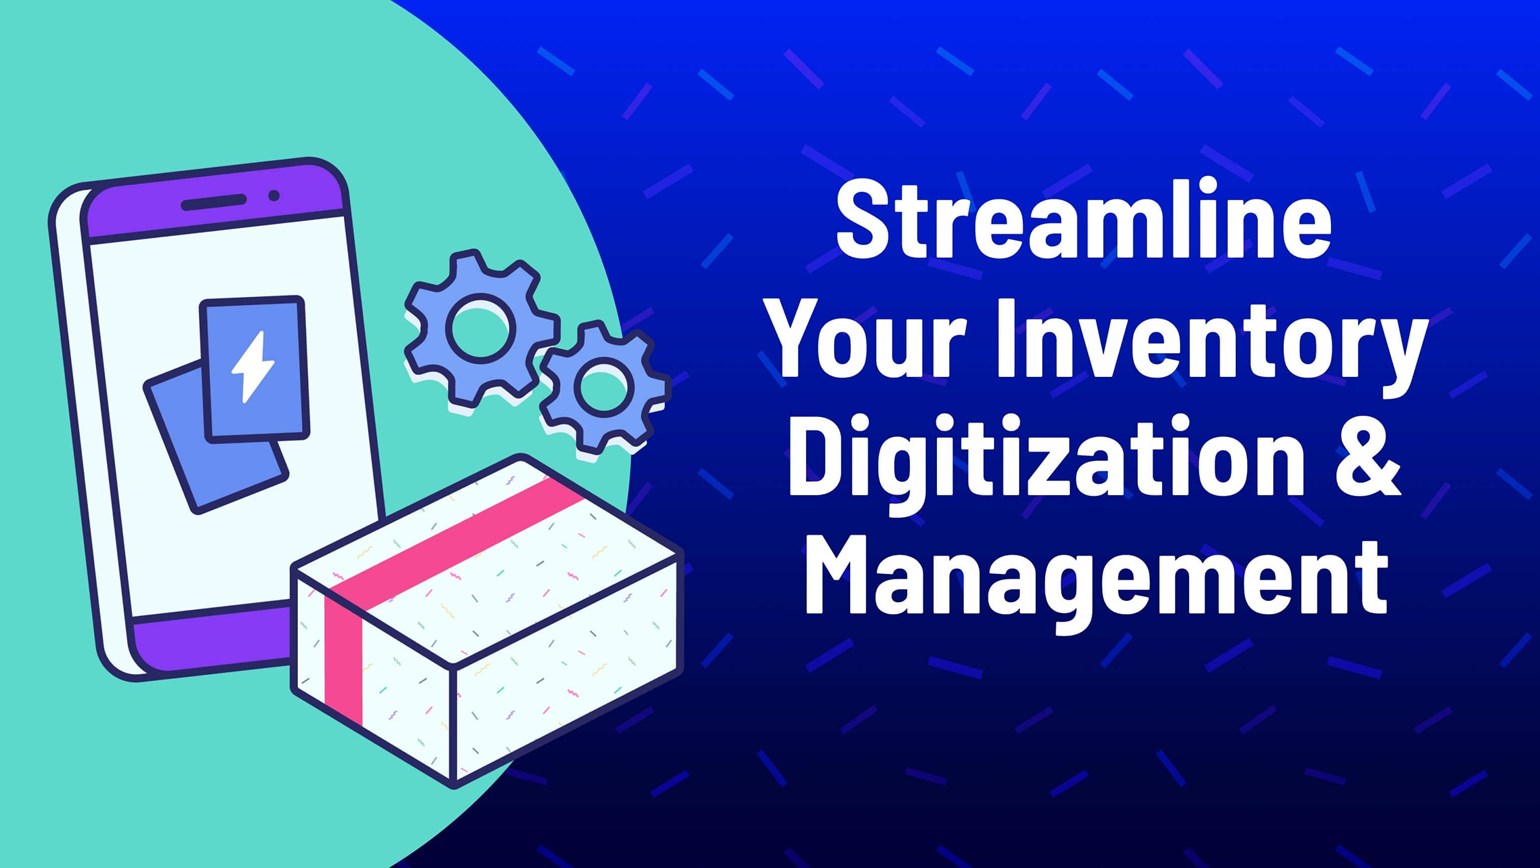 Streamline Your Inventory Digitization For Cyber Weekend